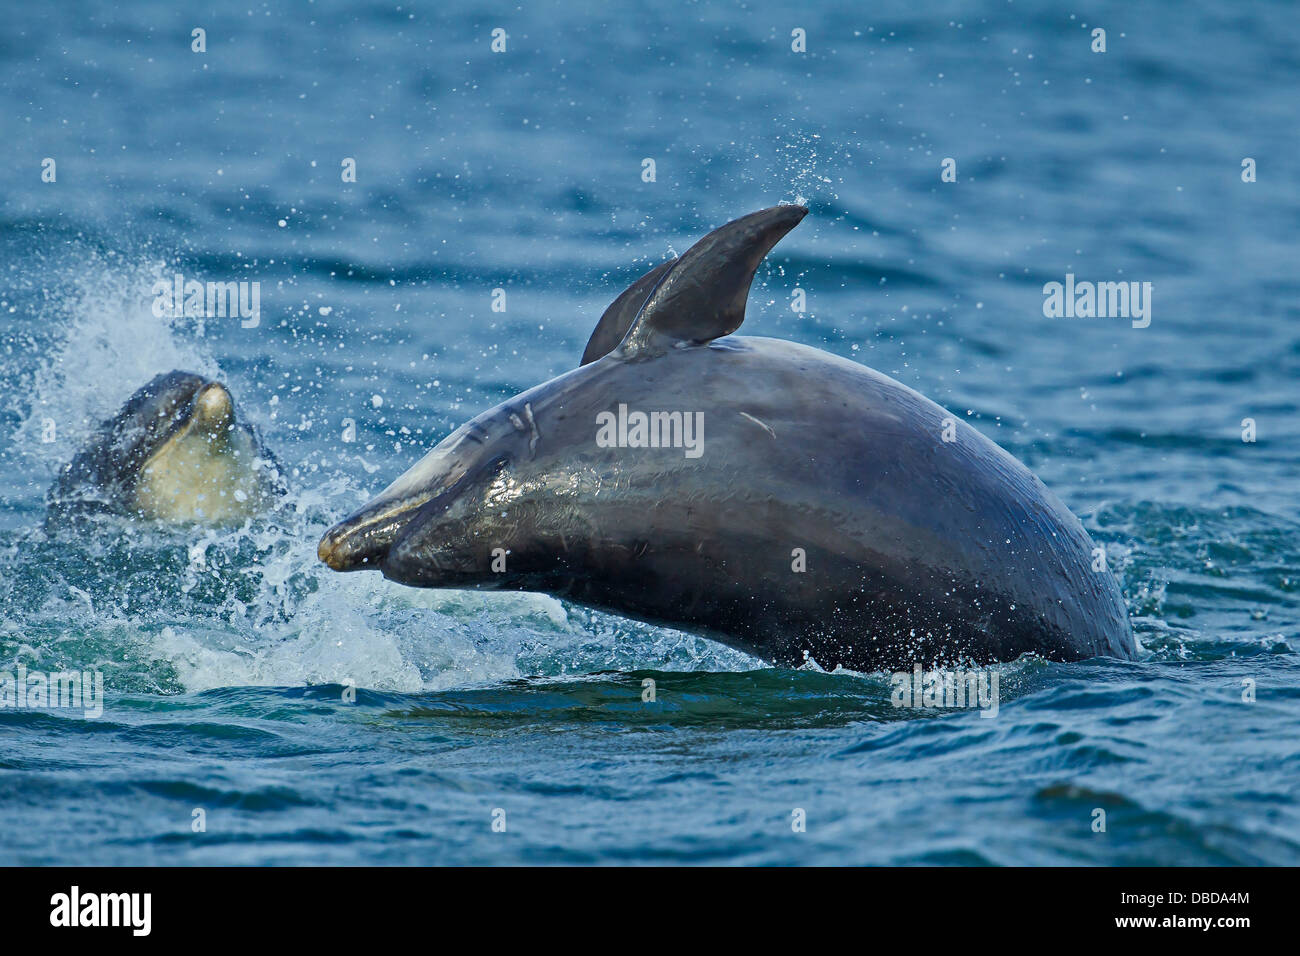 Bottlenose Dolphins chasing salmon at Chanonry Point in Scotland Stock Photo